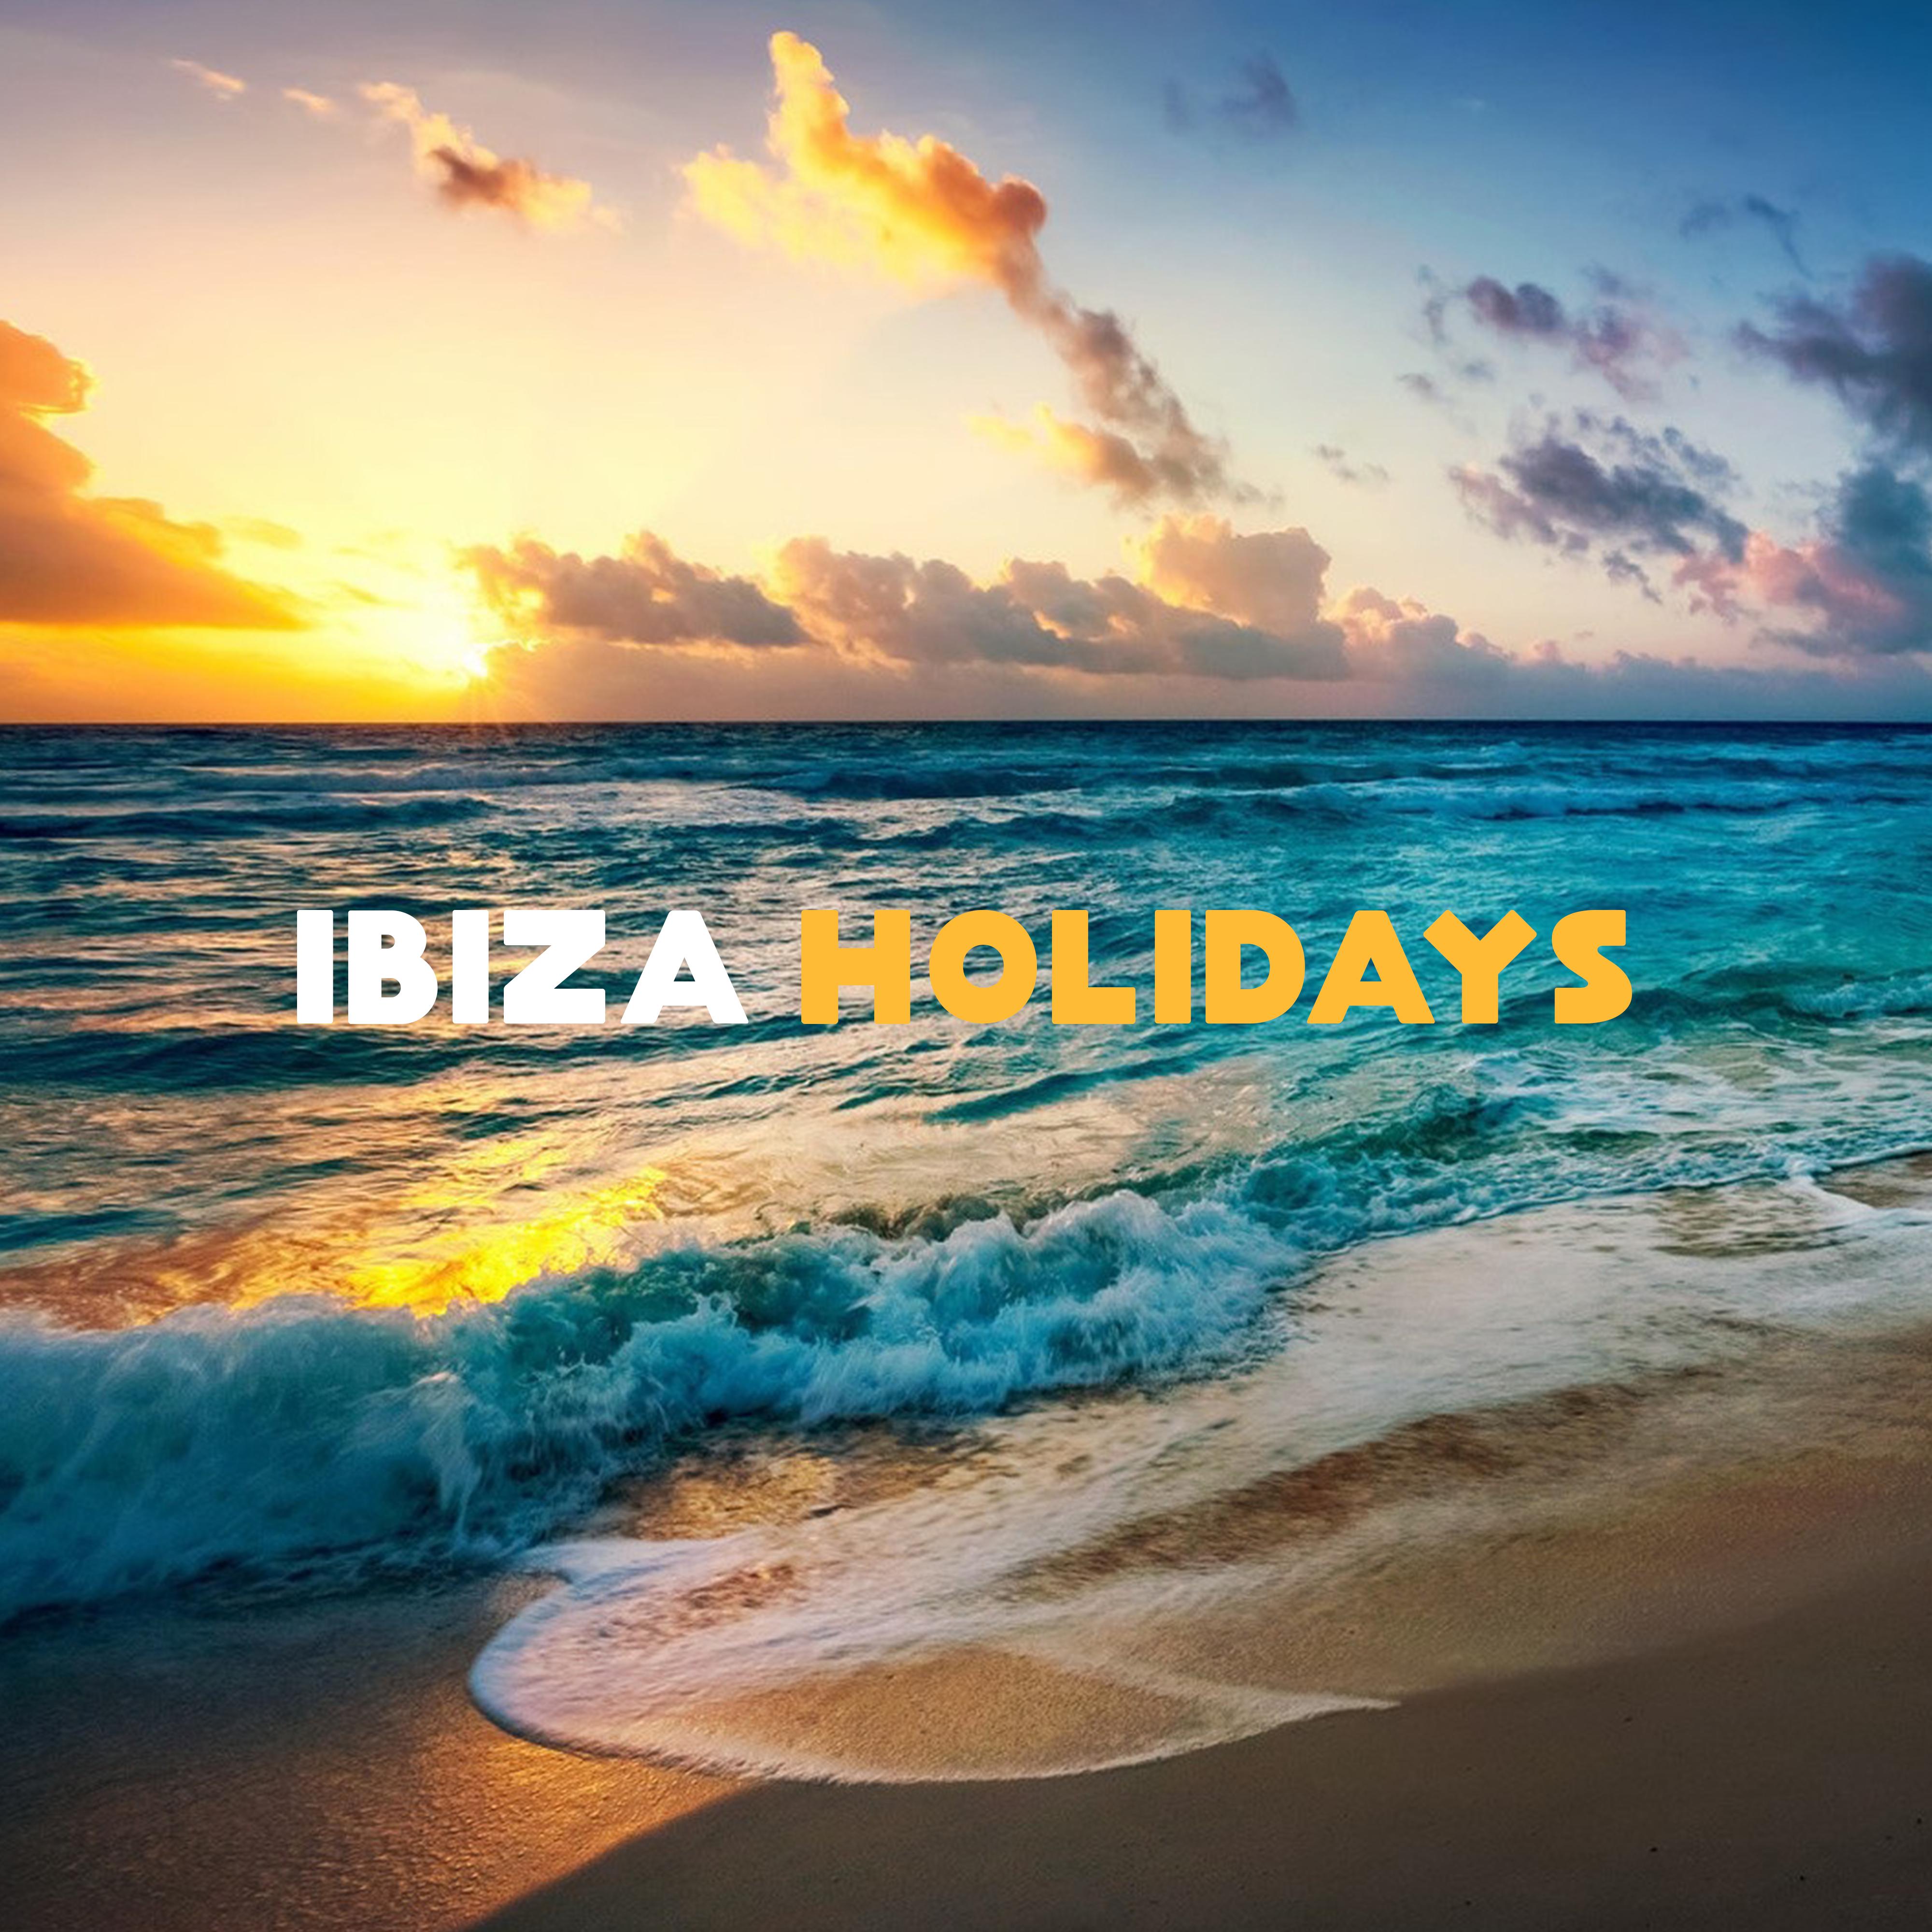 Ibiza Holidays: Summer Songs to Chill out, Relax, Calm Down and Rest